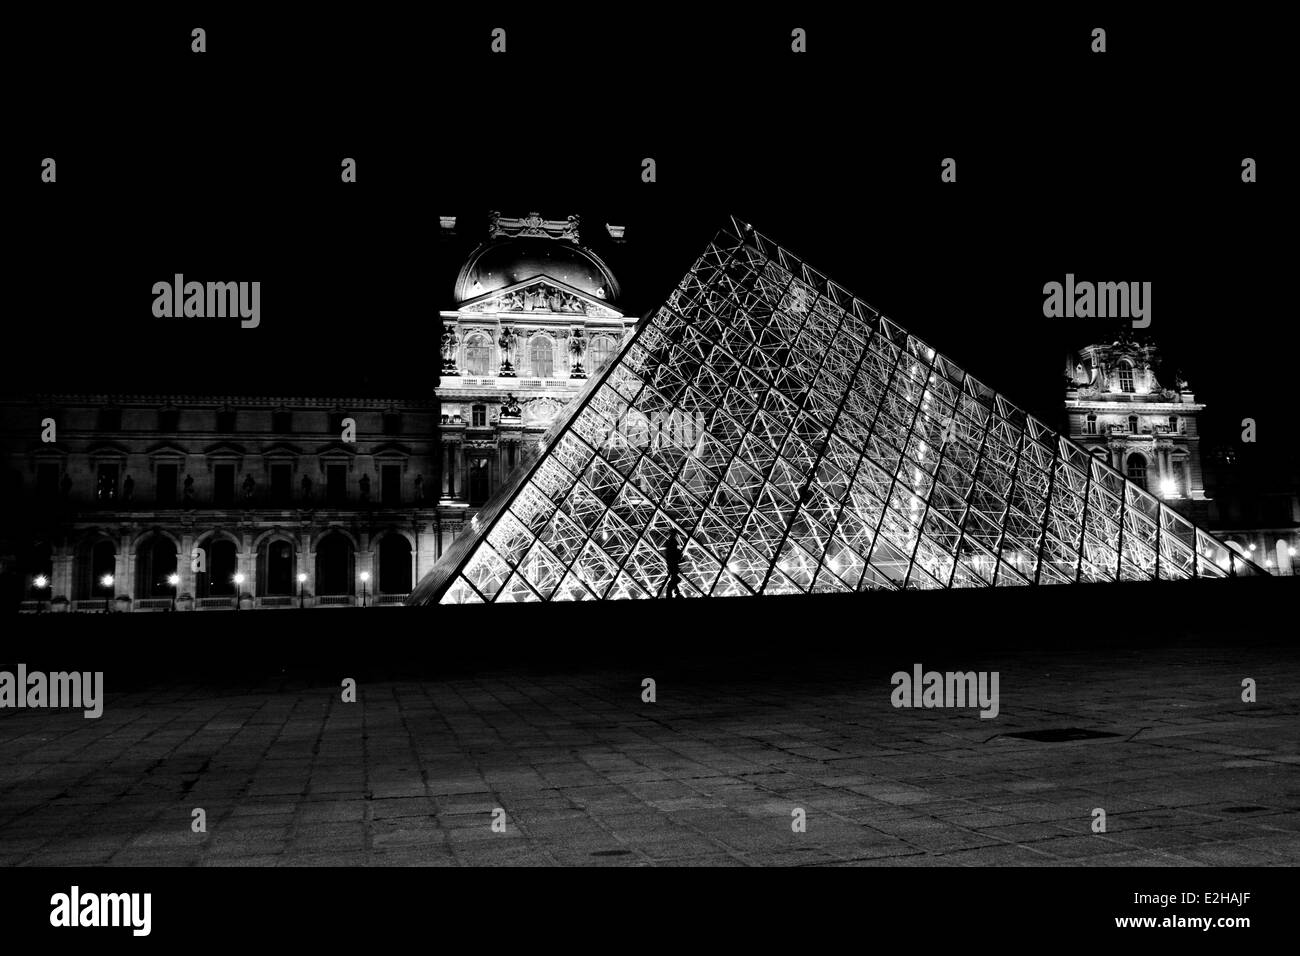 The Louvre Pyramid, a large glass and metal pyramid structure in the centre of the Louvre art gallery, Paris. Lit up at night. Stock Photo